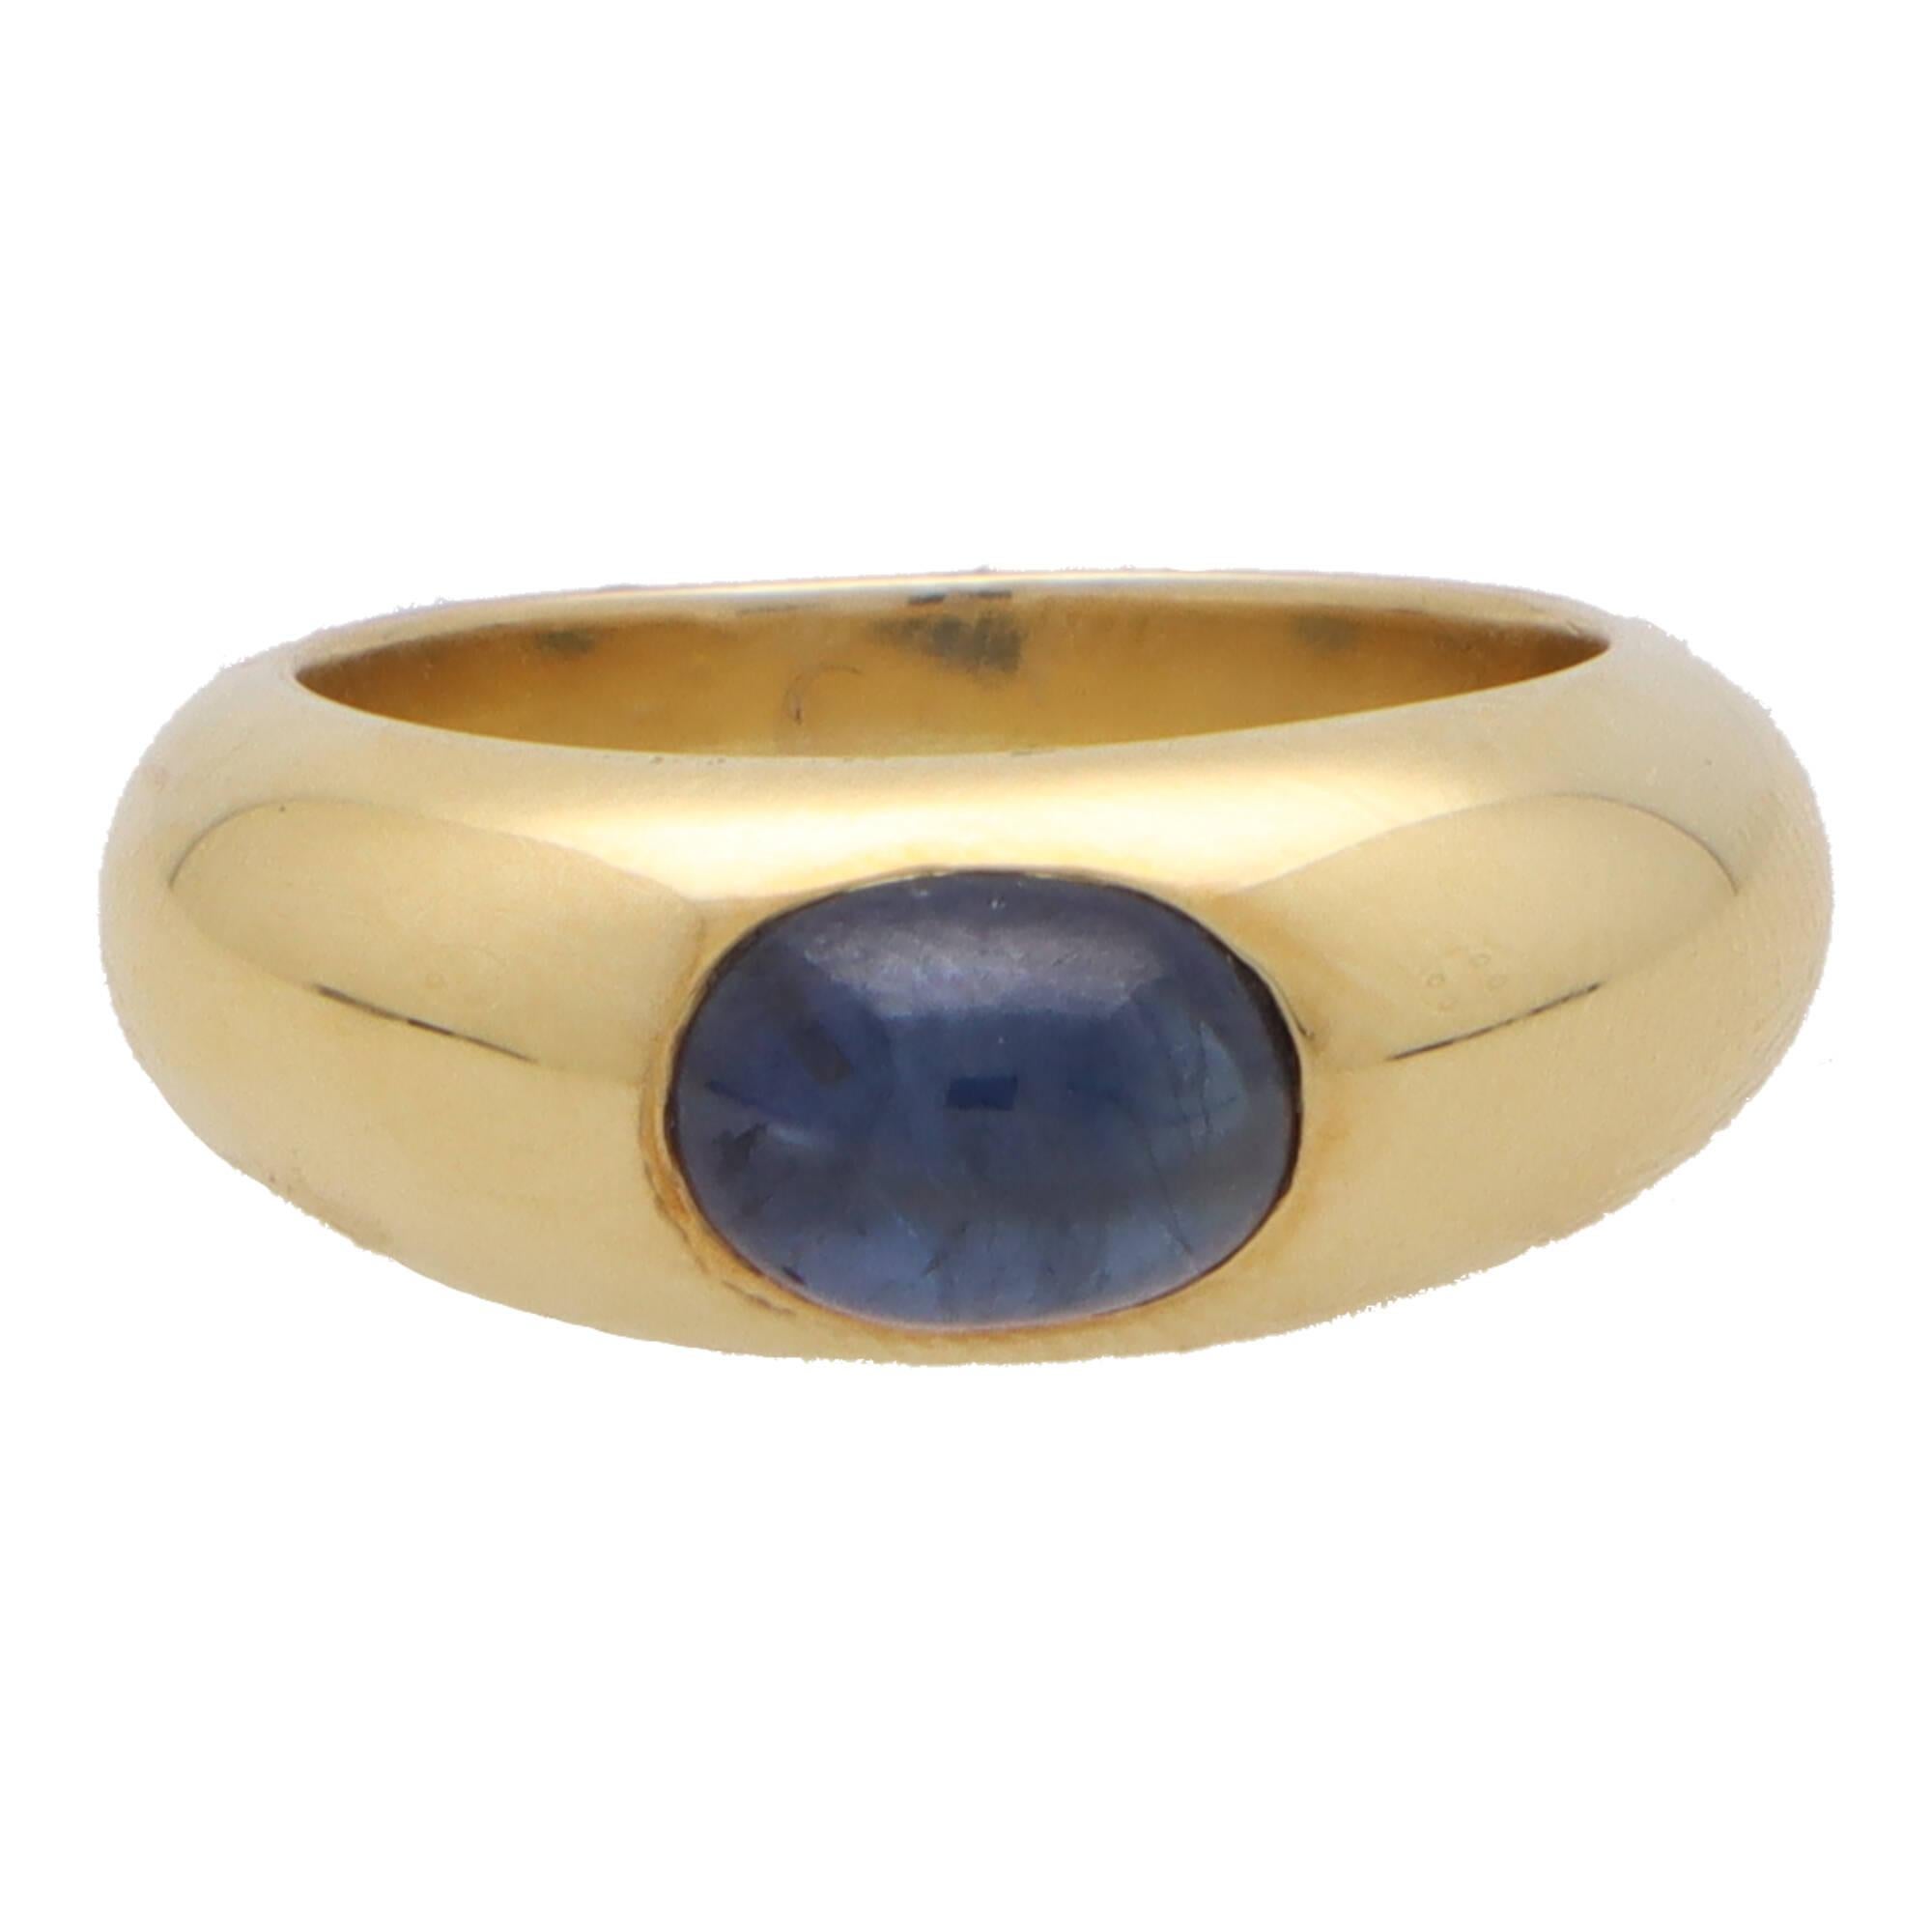 A stylish vintage cabochon sapphire gypsy set chunky ring set in 18k yellow gold.

The ring is solely set with an oval cabochon blue sapphire stone that is bezel set securely in a chunky style band.

Due to the design and size, this ring could be